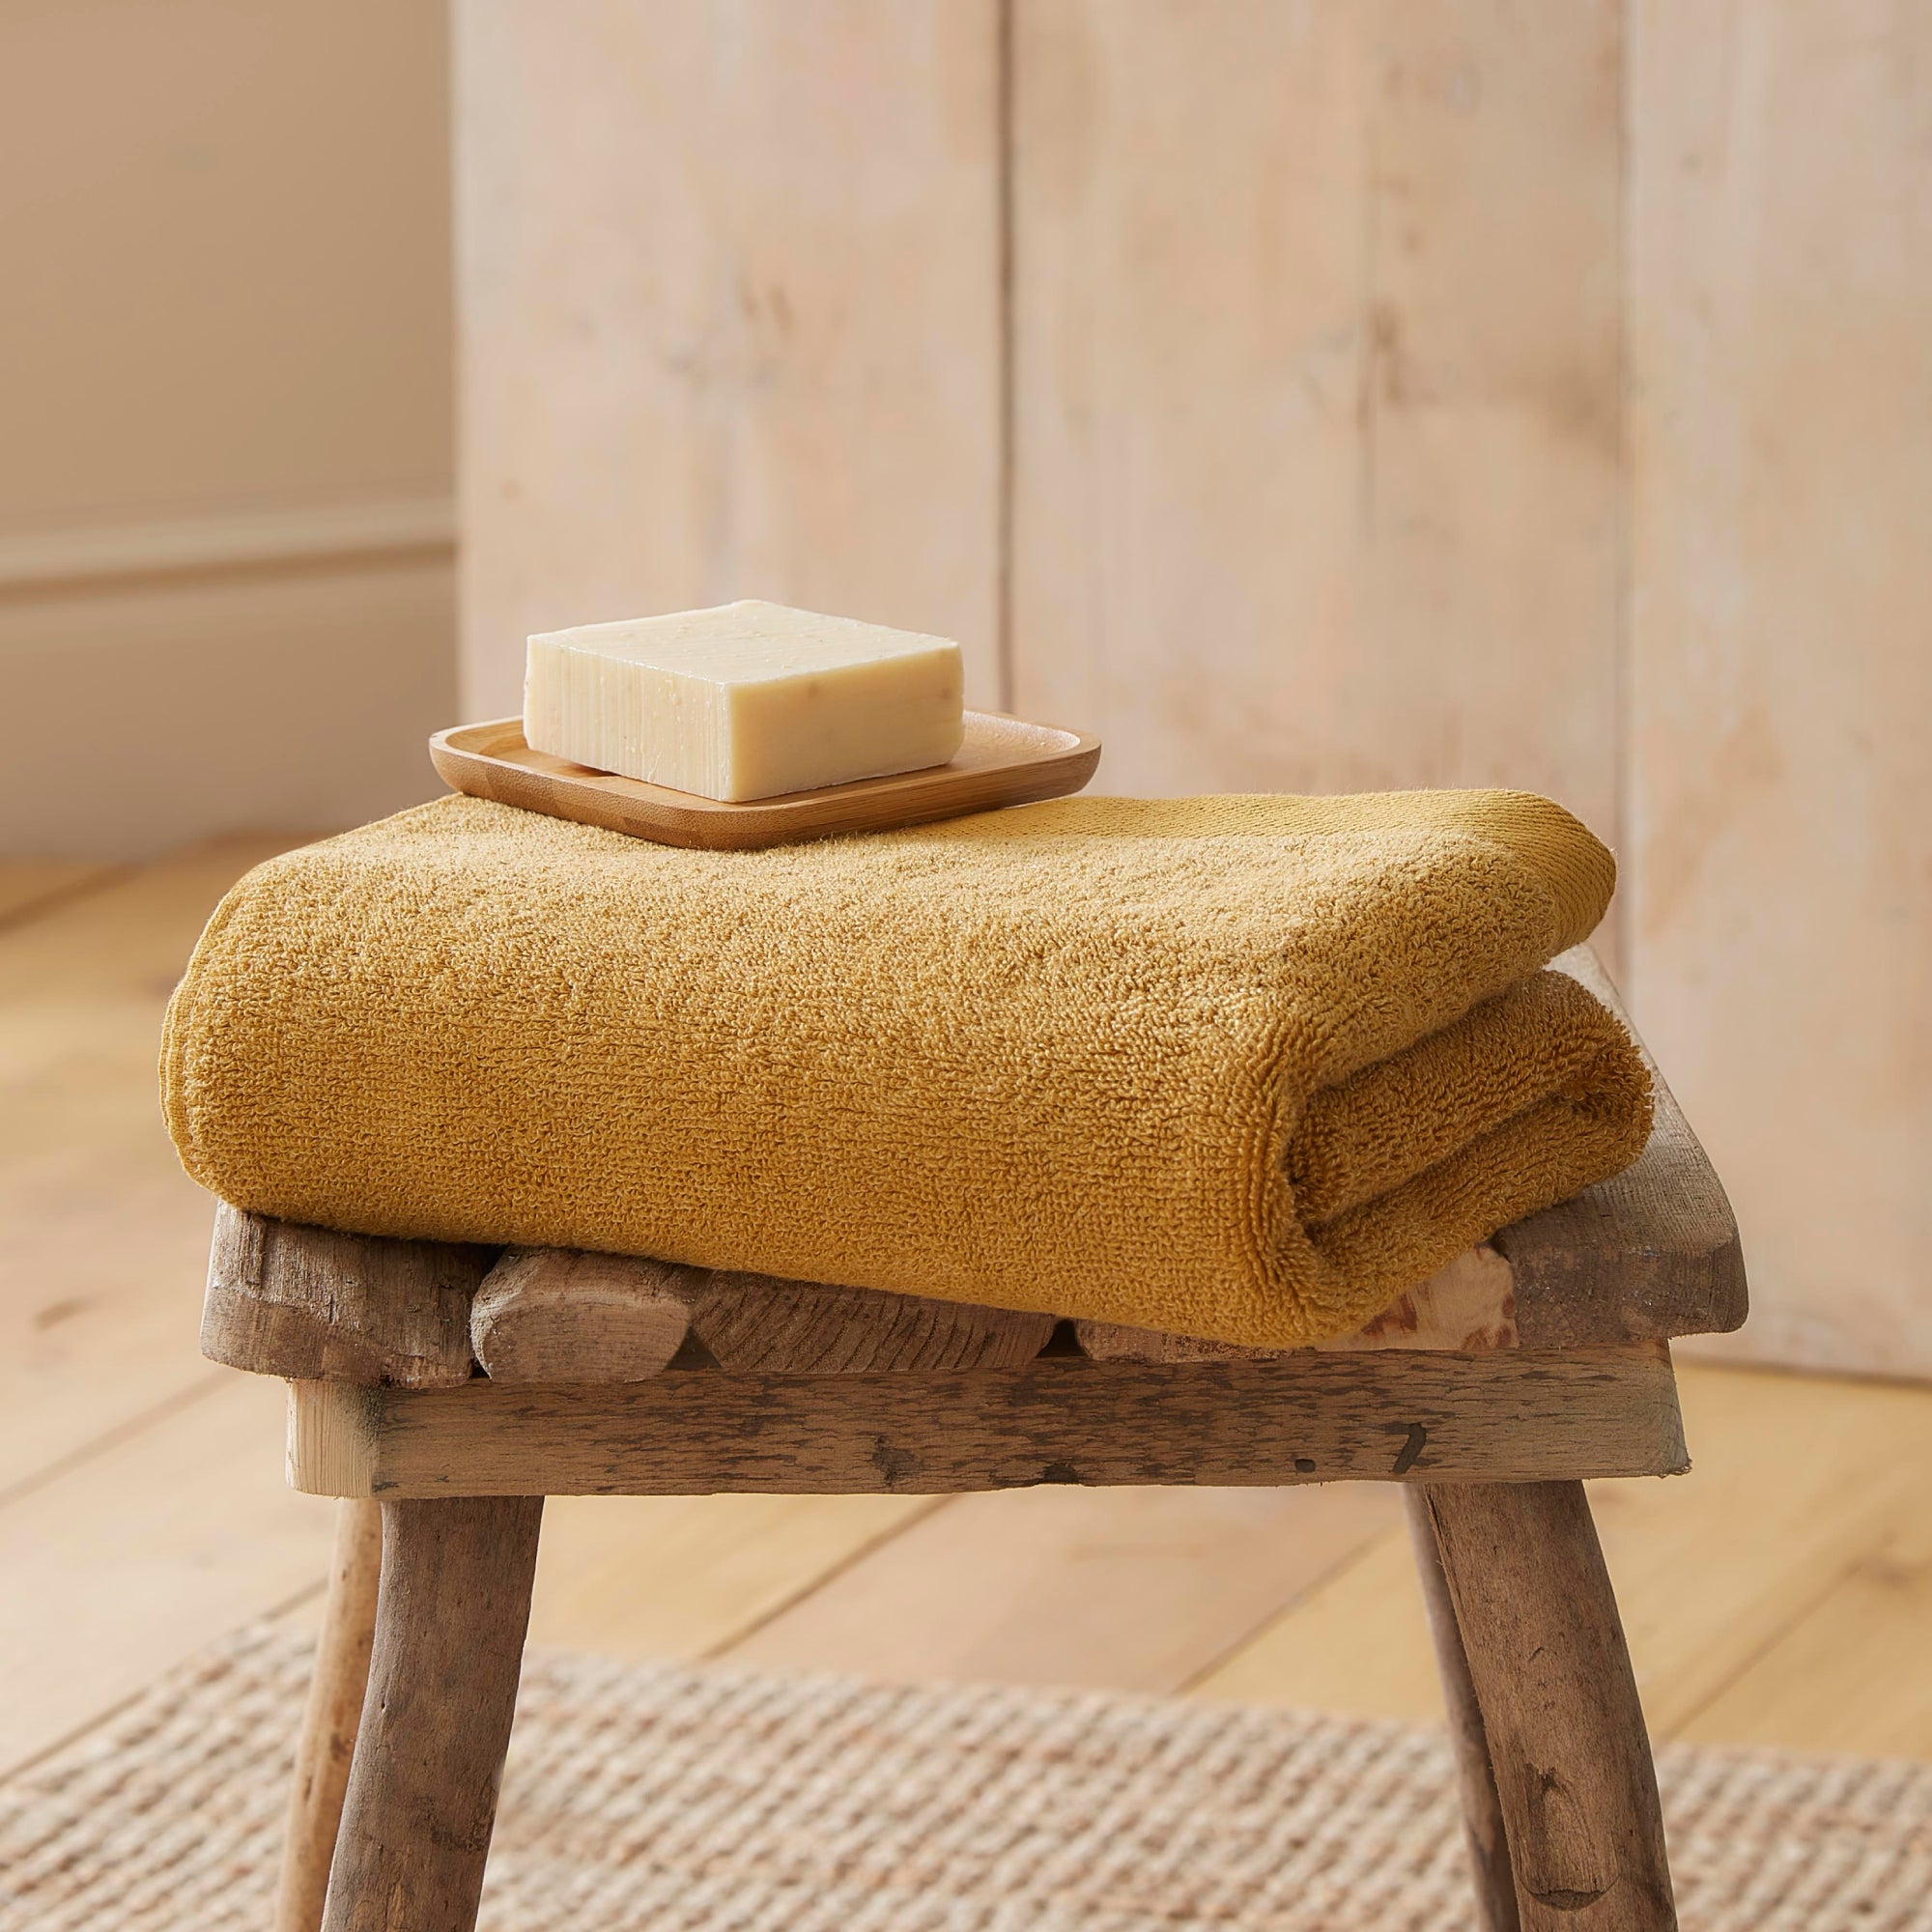 Hand Towel (2 pack) Abode Eco by Drift Home in Ochre